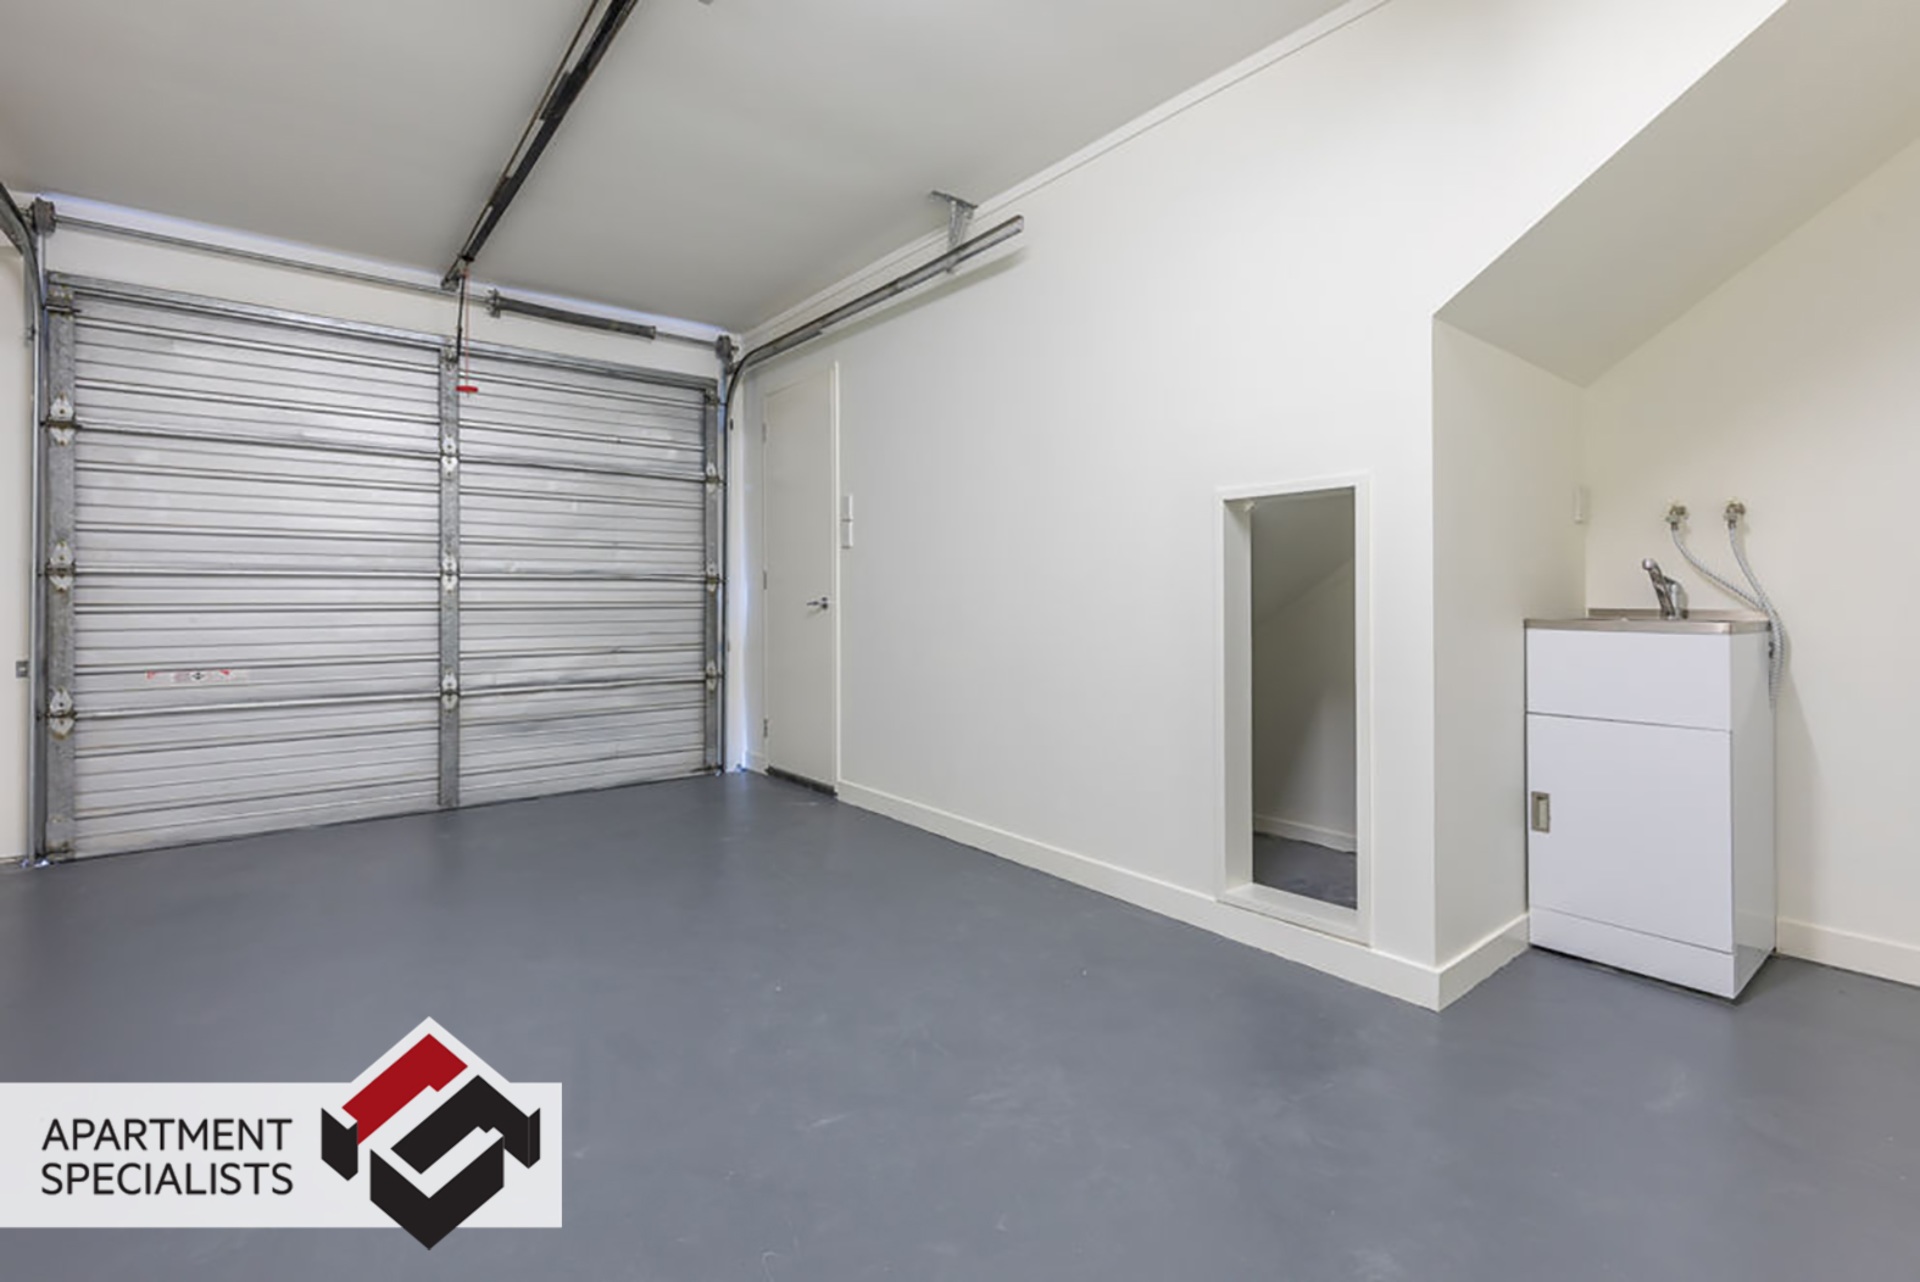 7 | 26 Mary Street, Mount Eden | Apartment Specialists